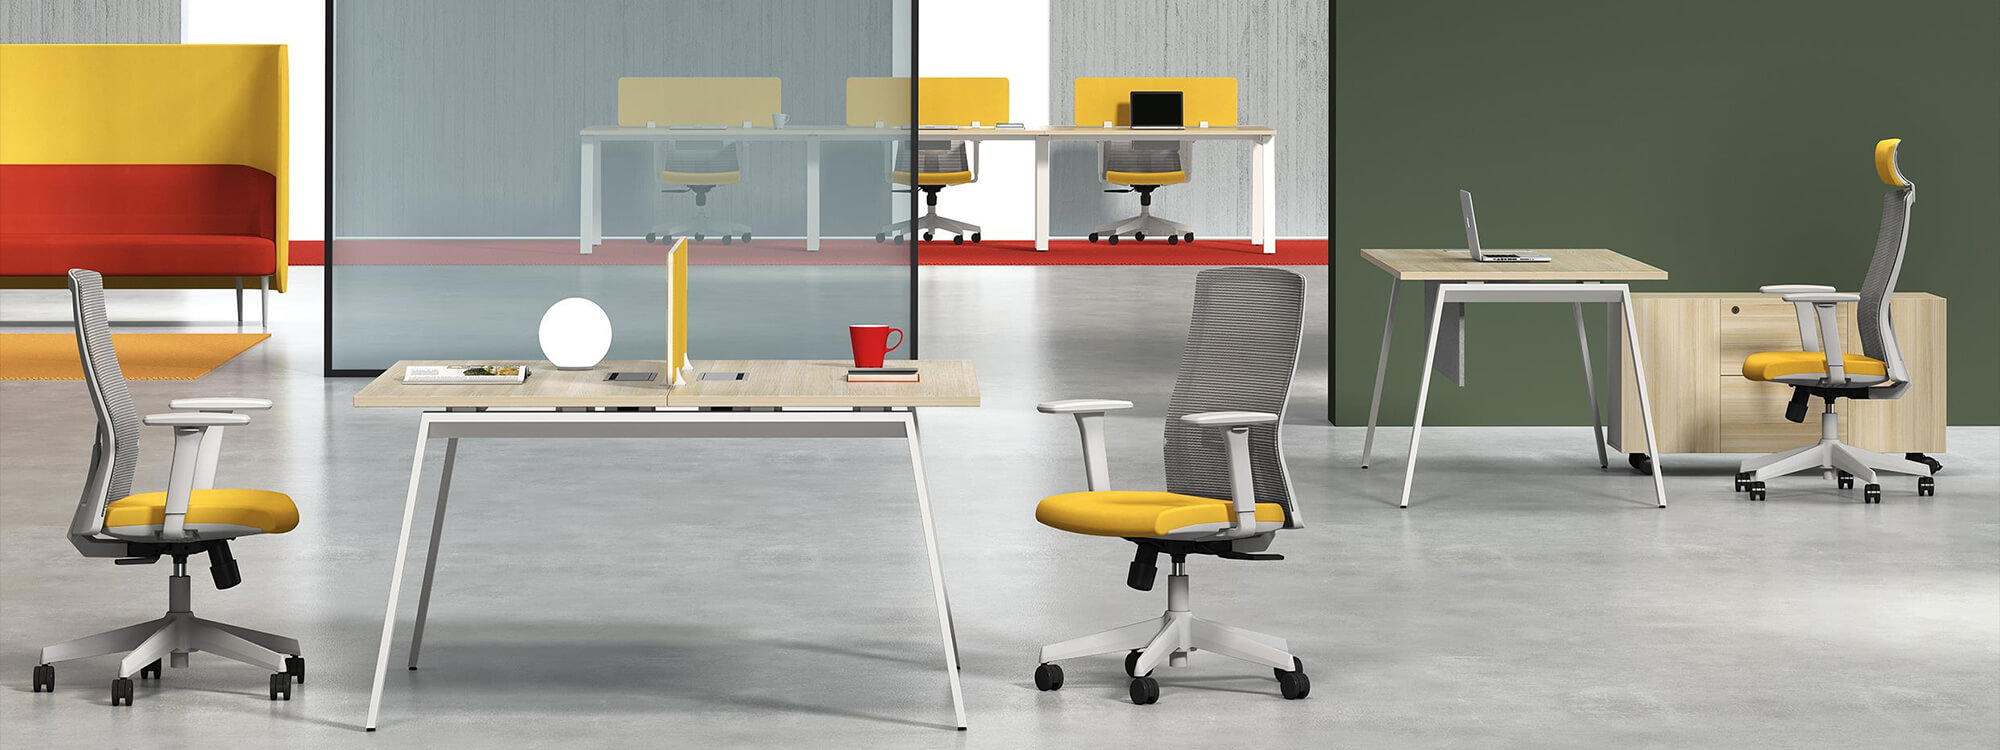 In the office is a two-seater workstation next to an office chair with a yellow cushion.